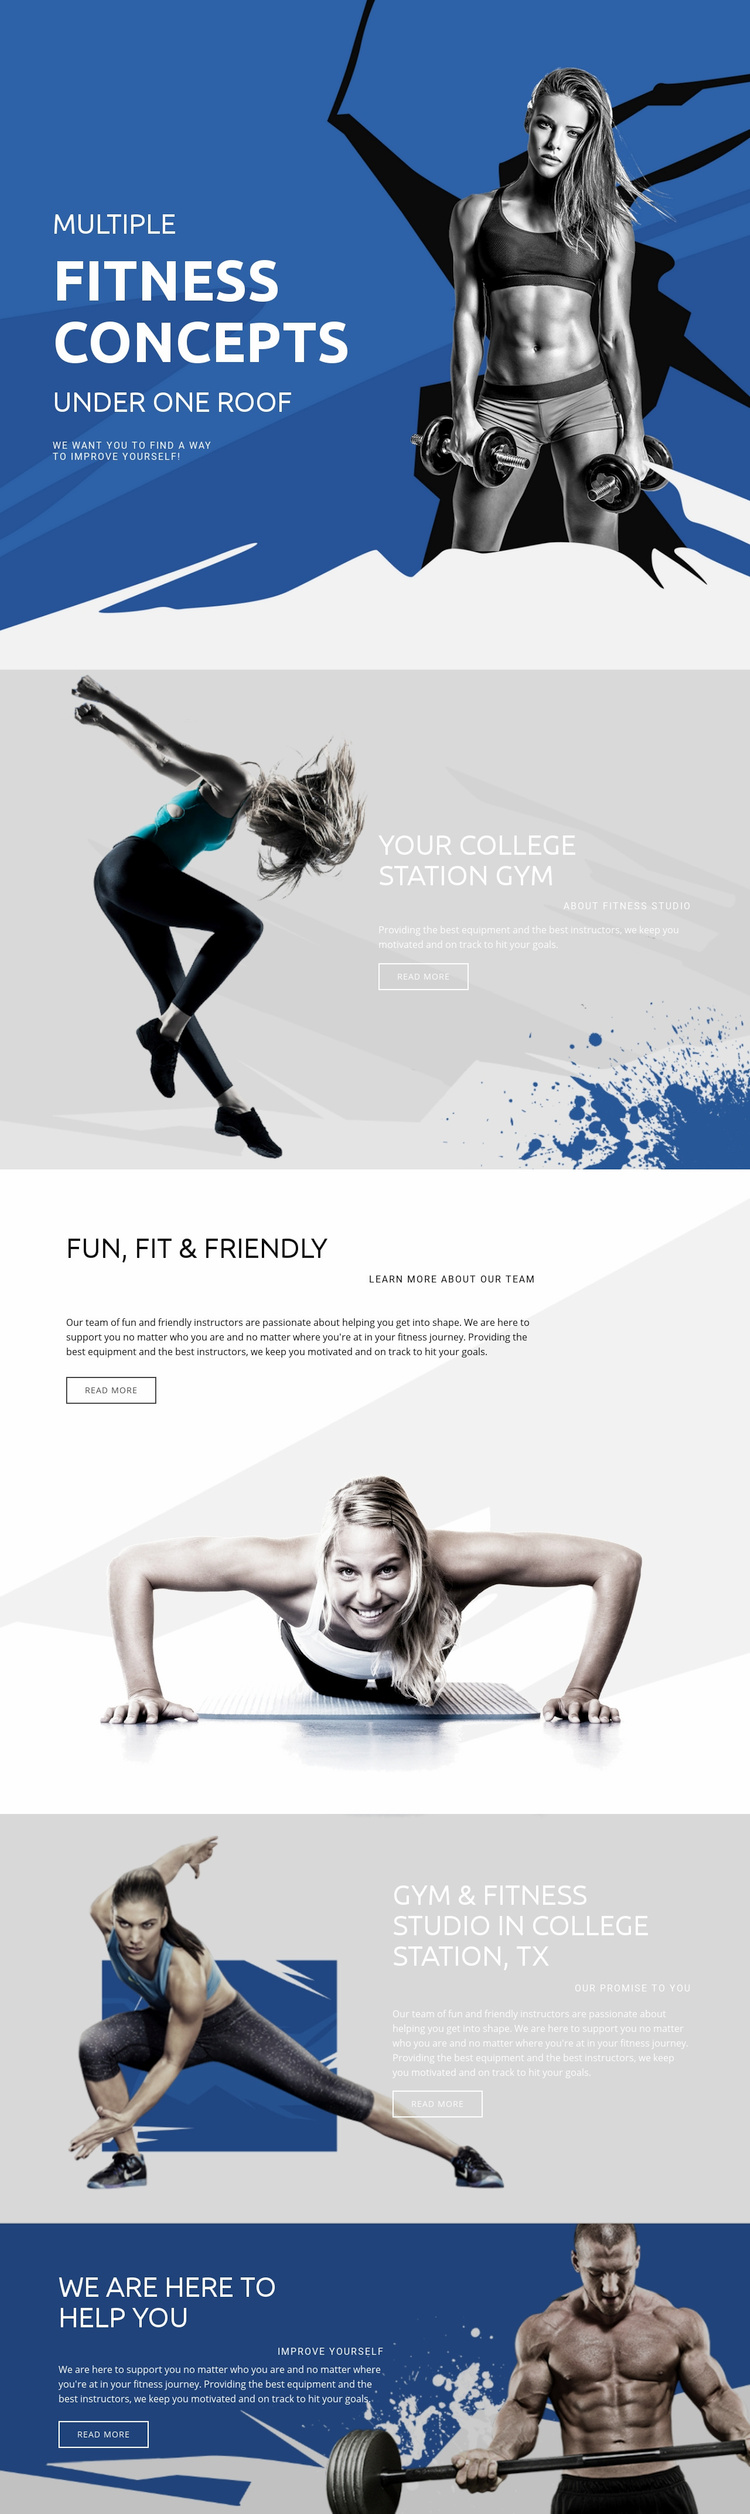 Best fitness and sports Wix Template Alternative